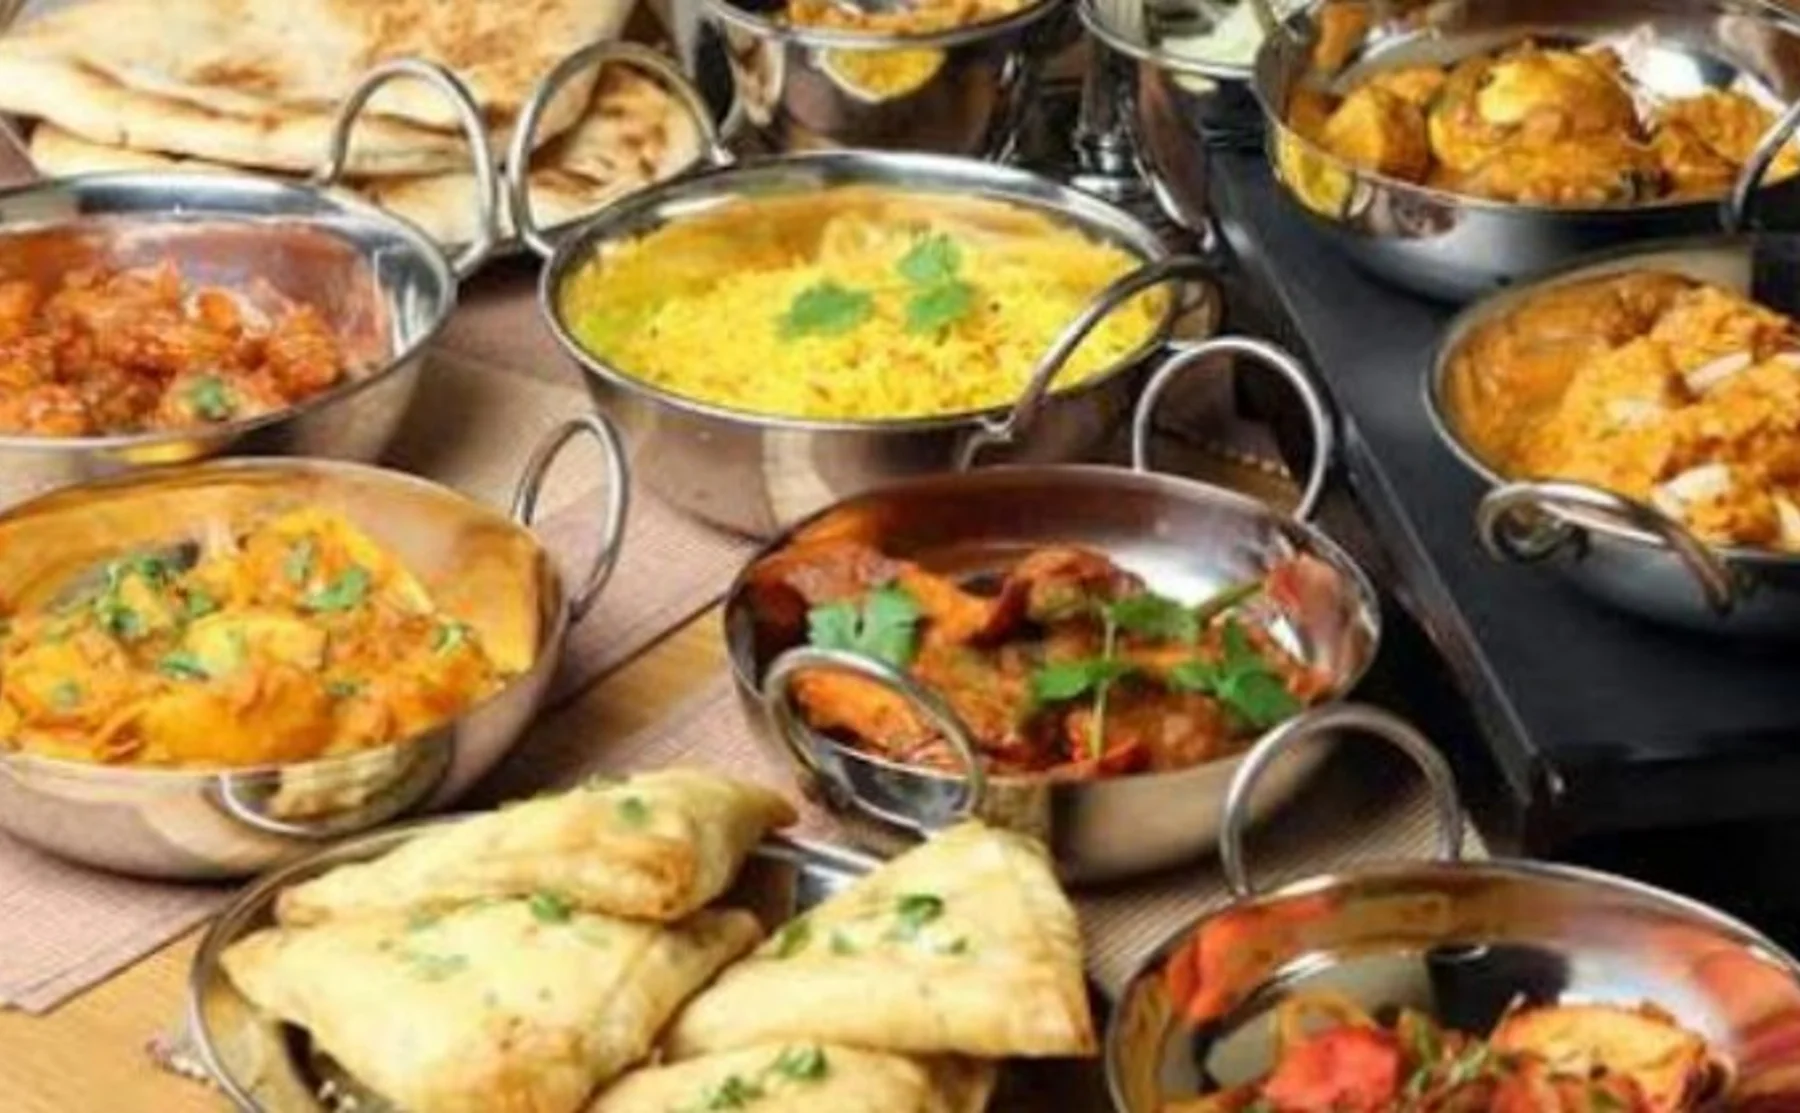 Eat an Authentic Meal with a Rajasthani Family - 352426